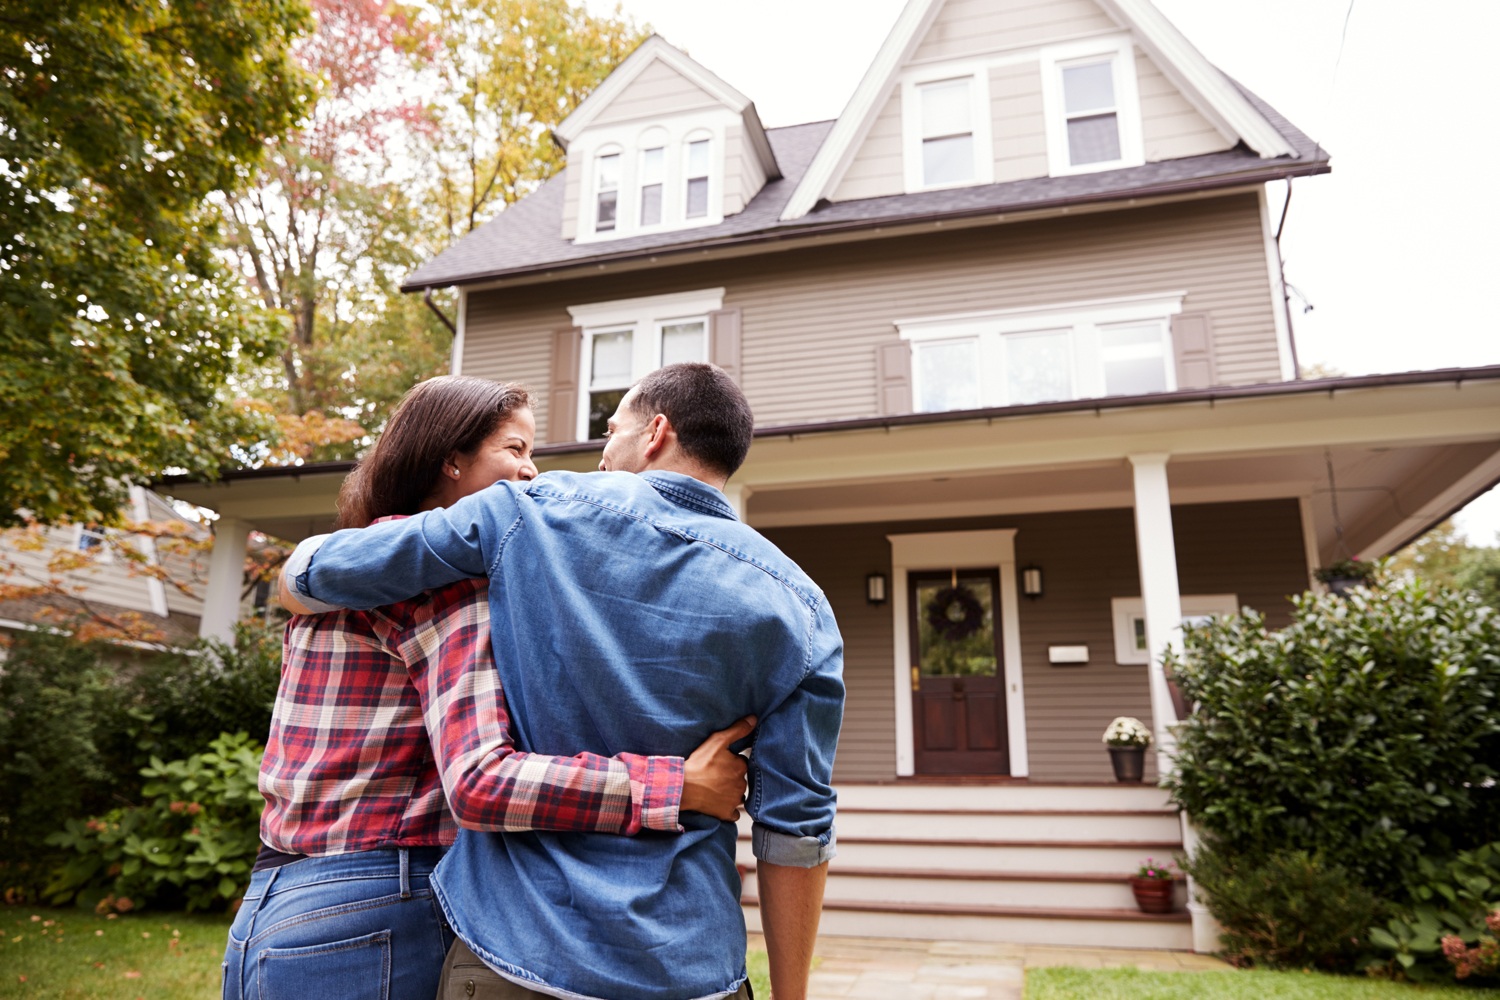 How to Connect with a Local Cash Home Buyer in Your Area?